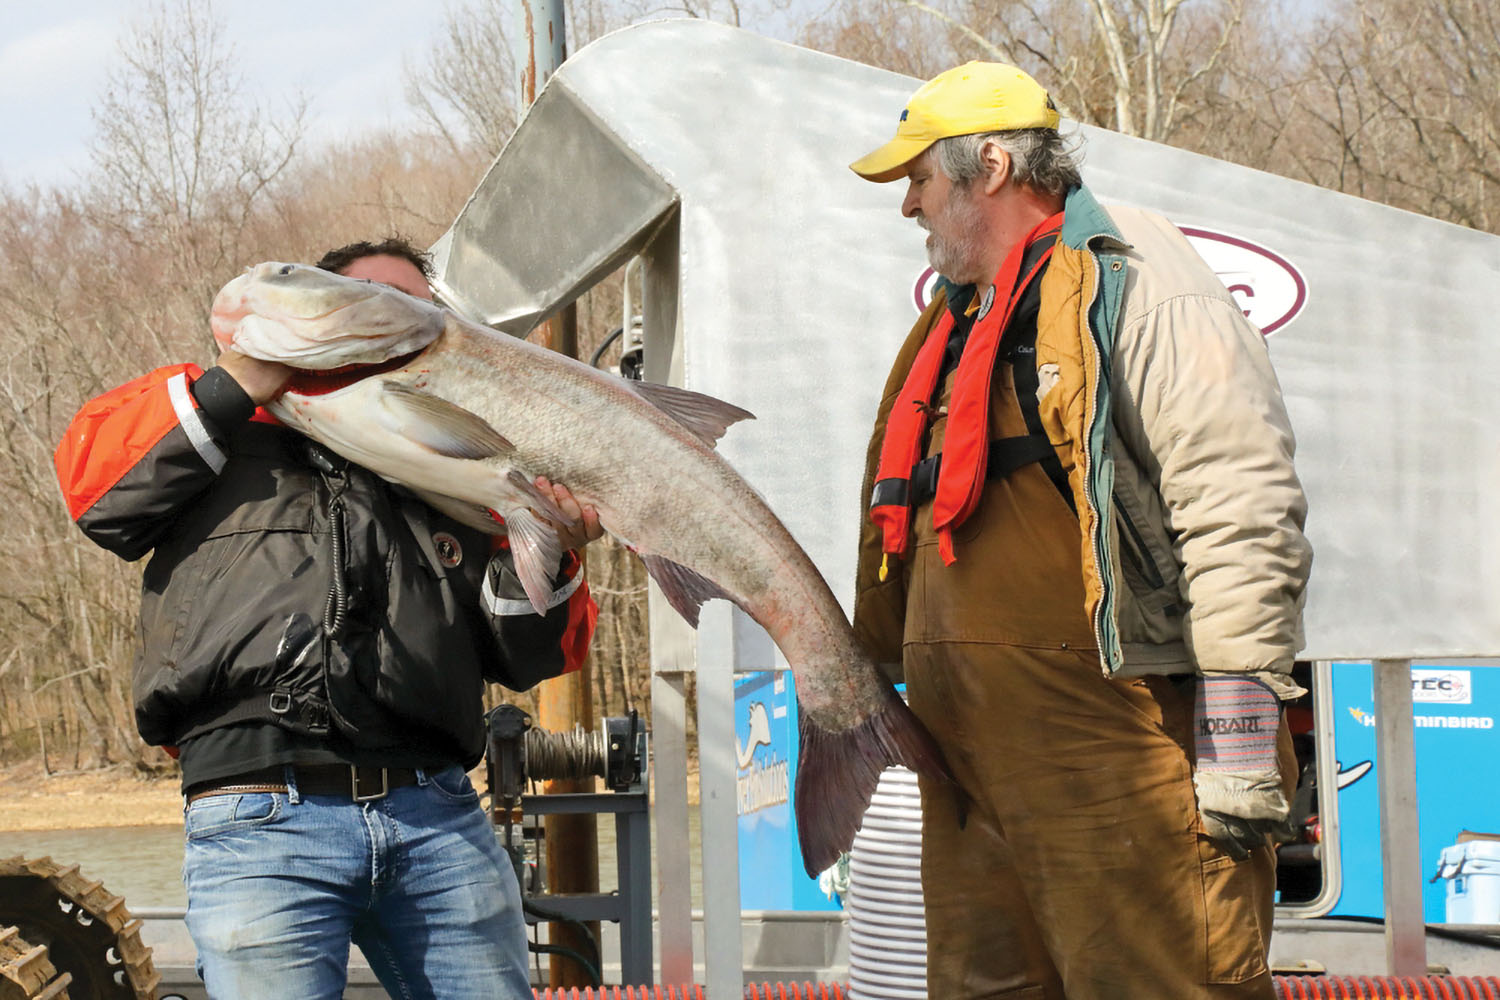 An Asian carp pulled out of Kentucky Lake. (Photo courtesy of Lee McClellan, Kentucky Department of Fish and Wildlife Resources)